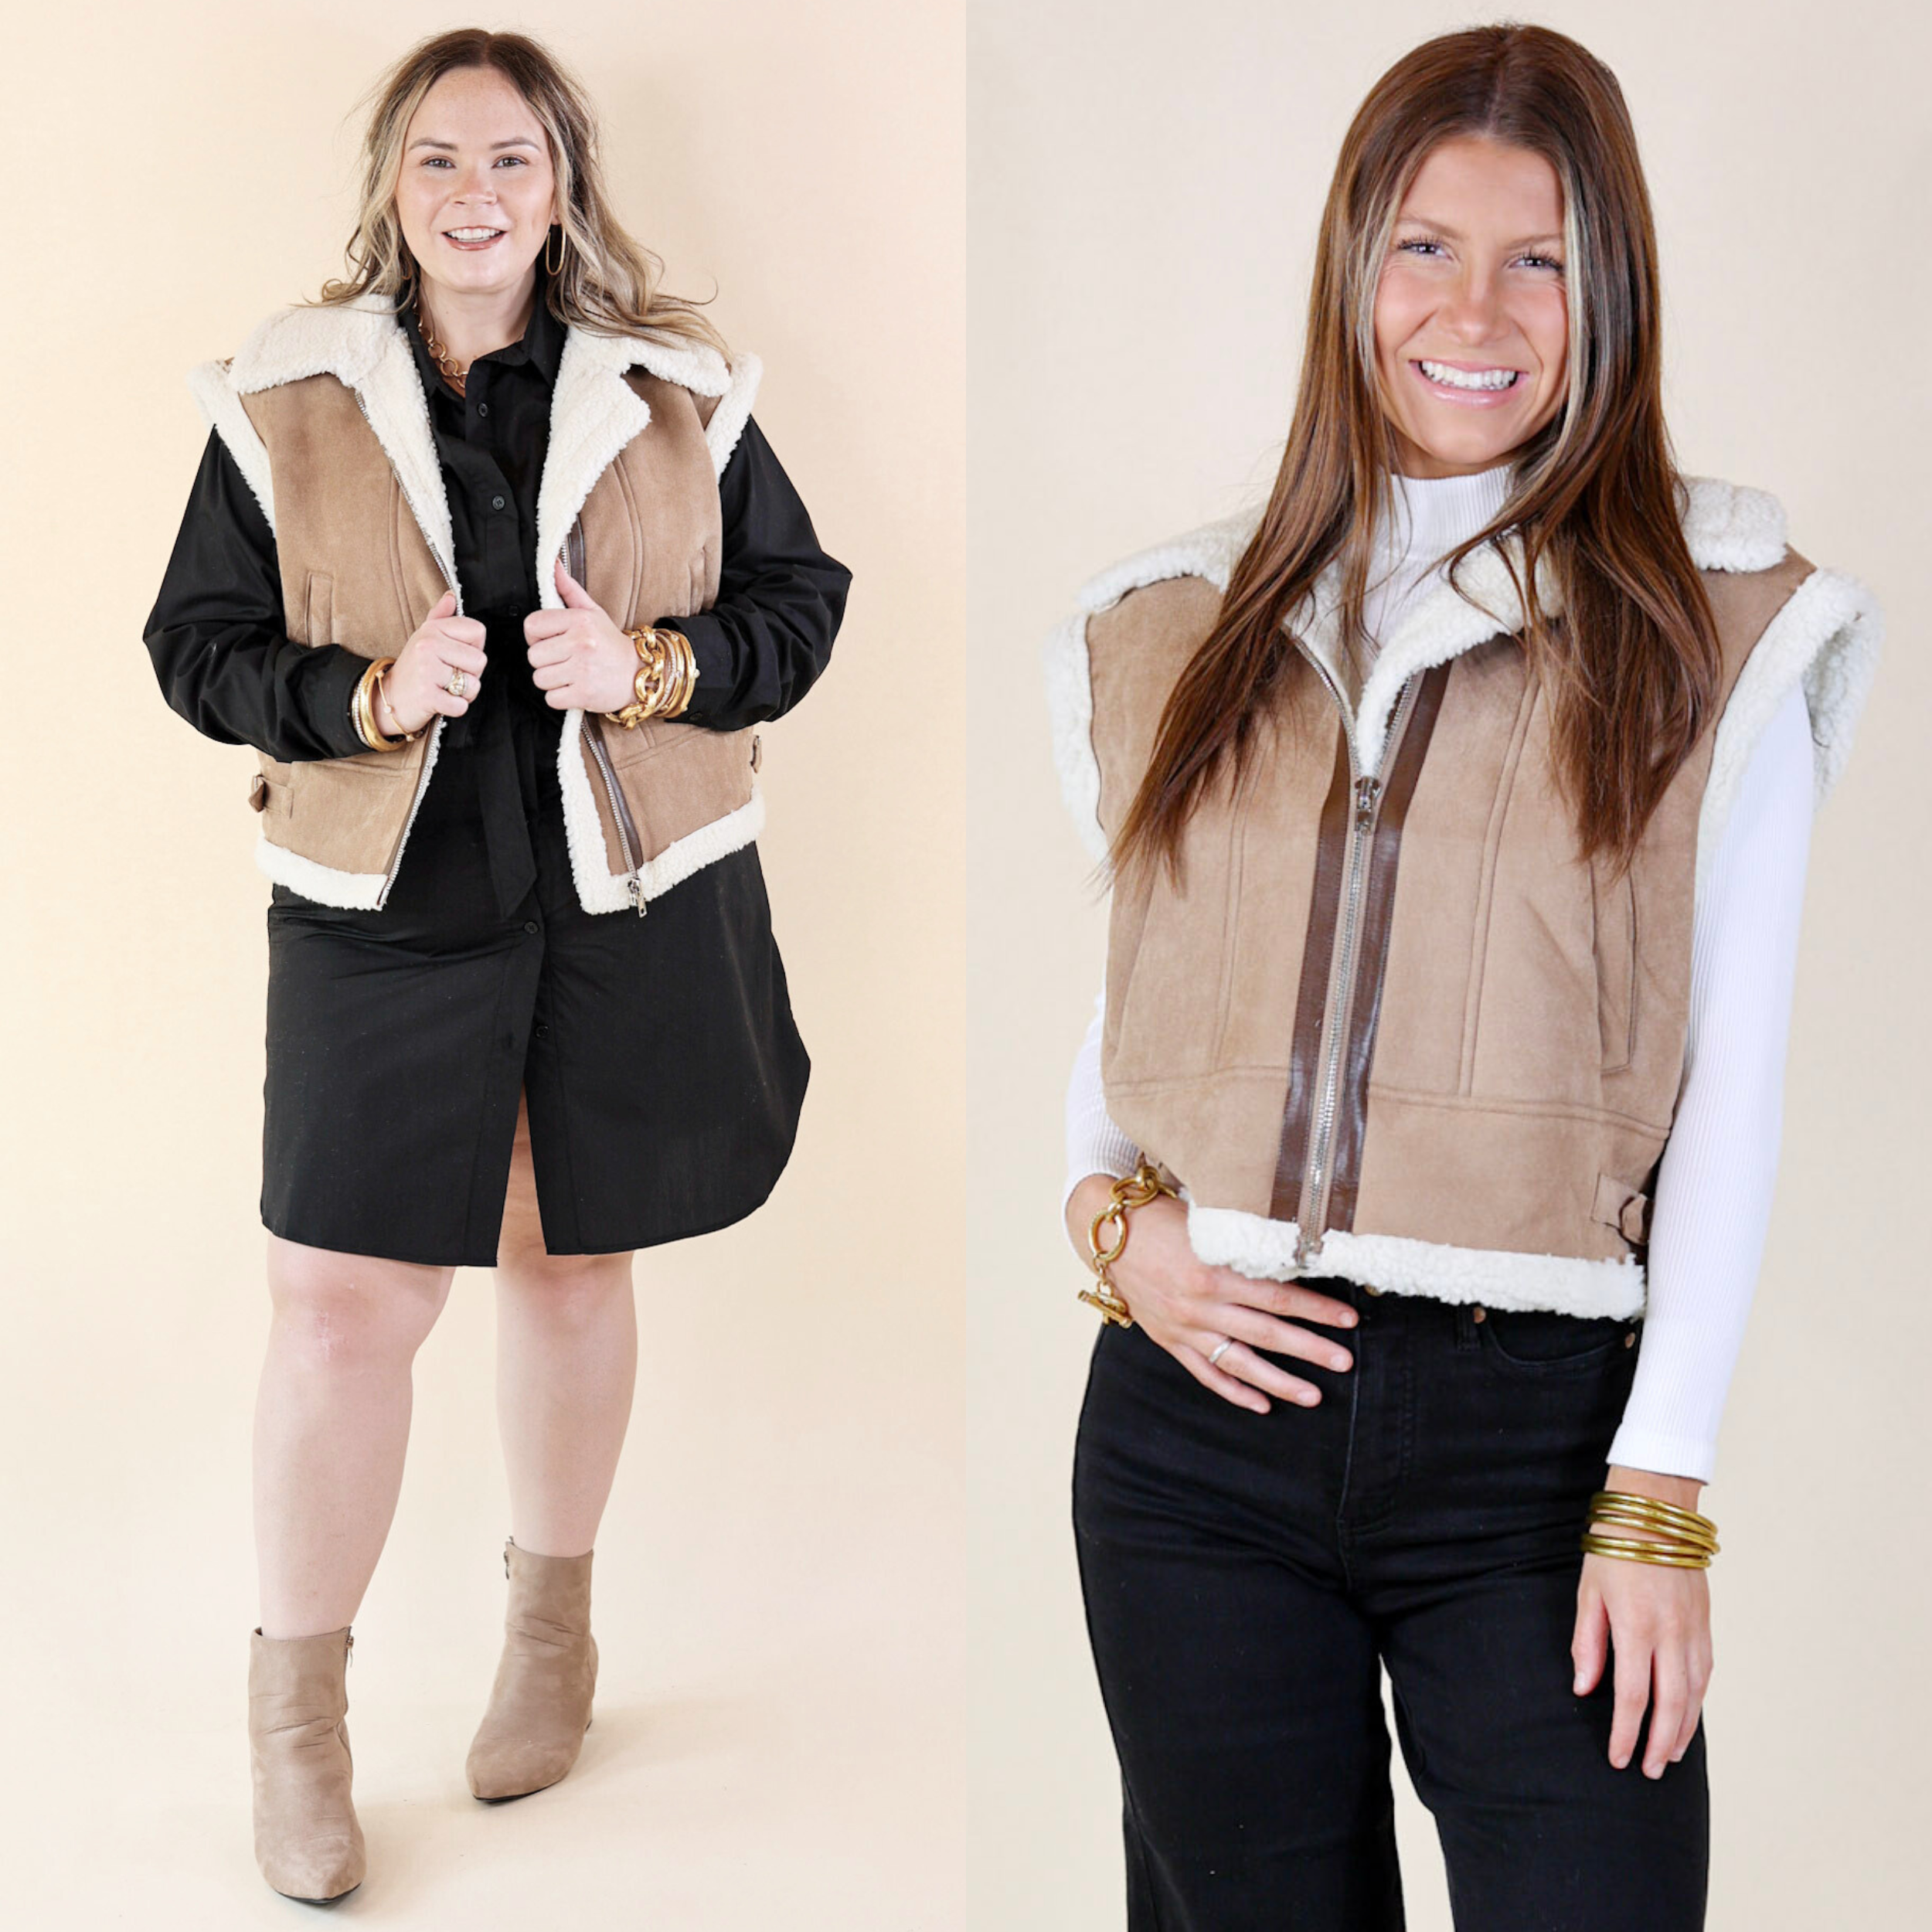 Models are wearing a light tan suede vest with white sherpa lining and a zip up front. Size large model has it paired with a black button up dress, suede booties, and gold jewelry. Size small model has it paired with black jeans, a white long sleeve top, and gold jewelry.